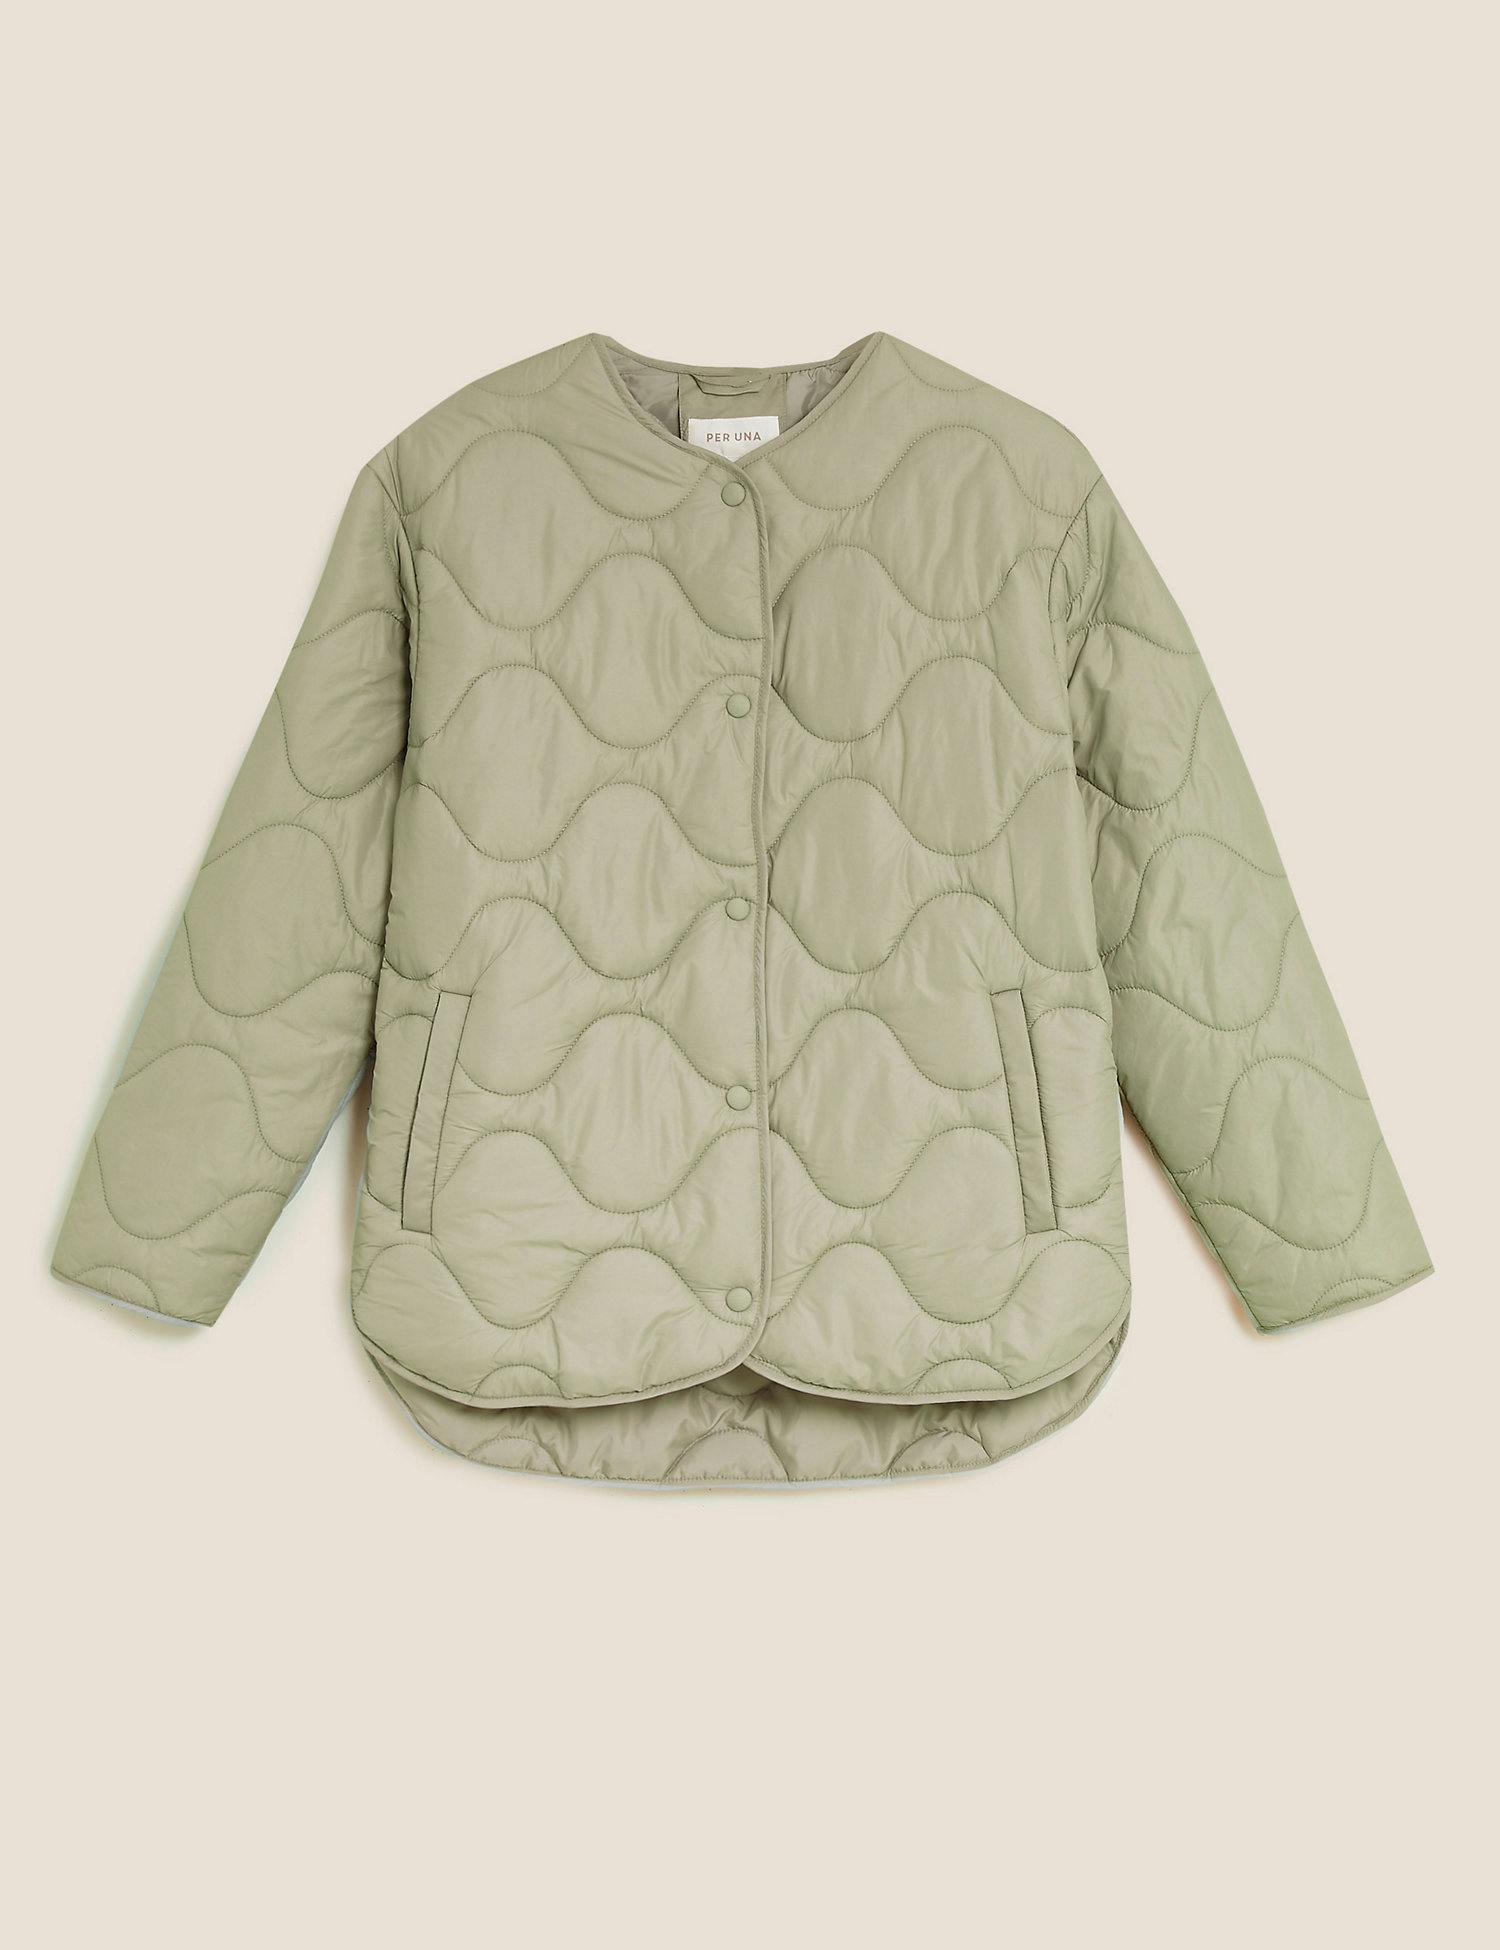 M&S ANGEL Khaki Lightweight Quilted Jacket with Cord Trim 